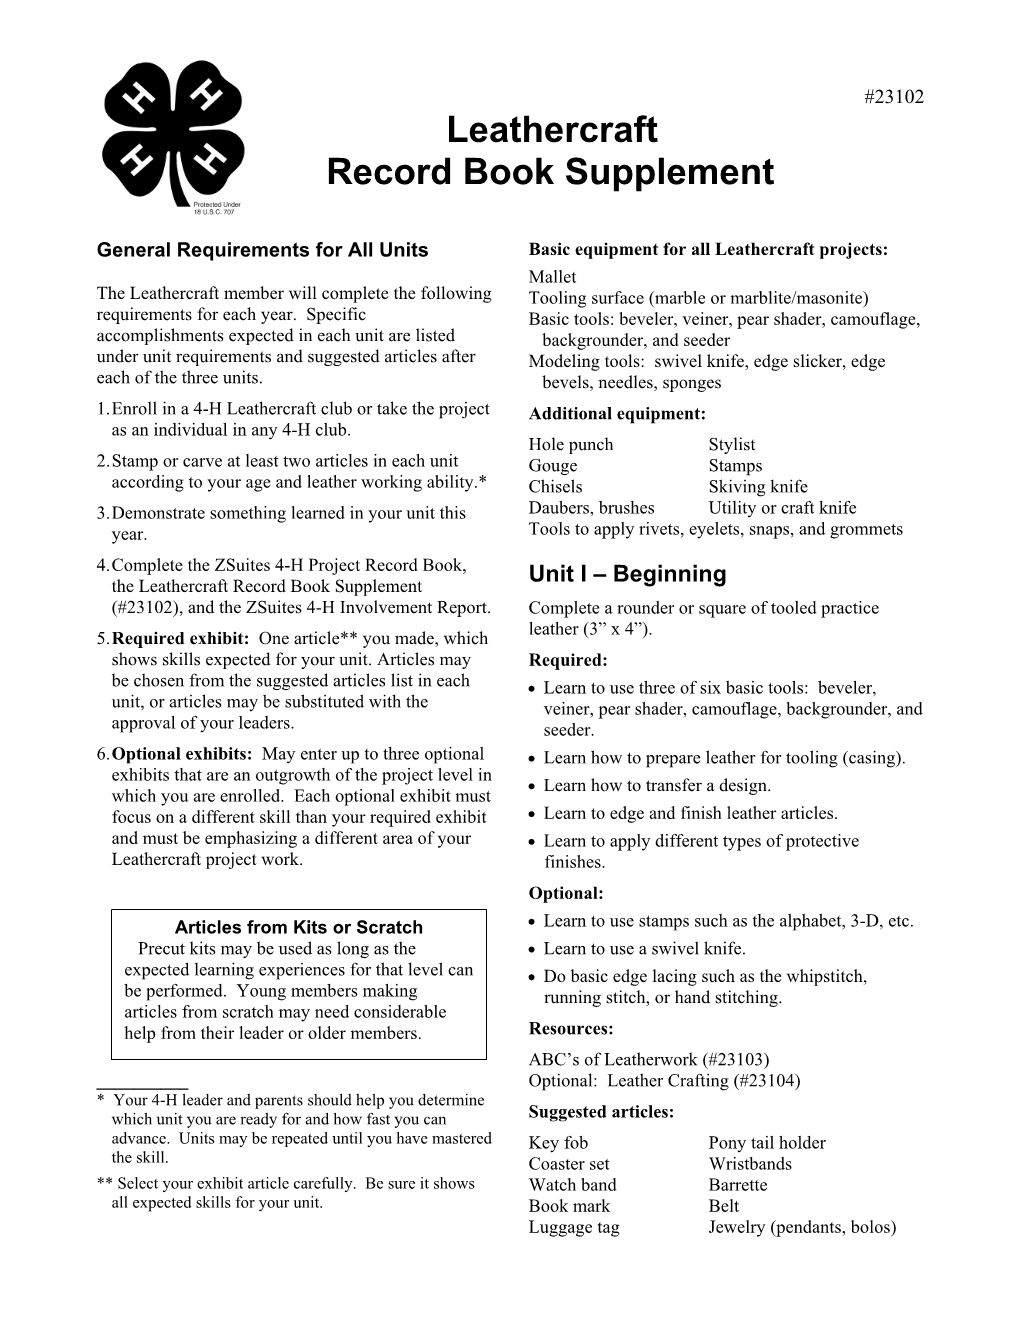 23102 Leathercraft Record Book Supplement